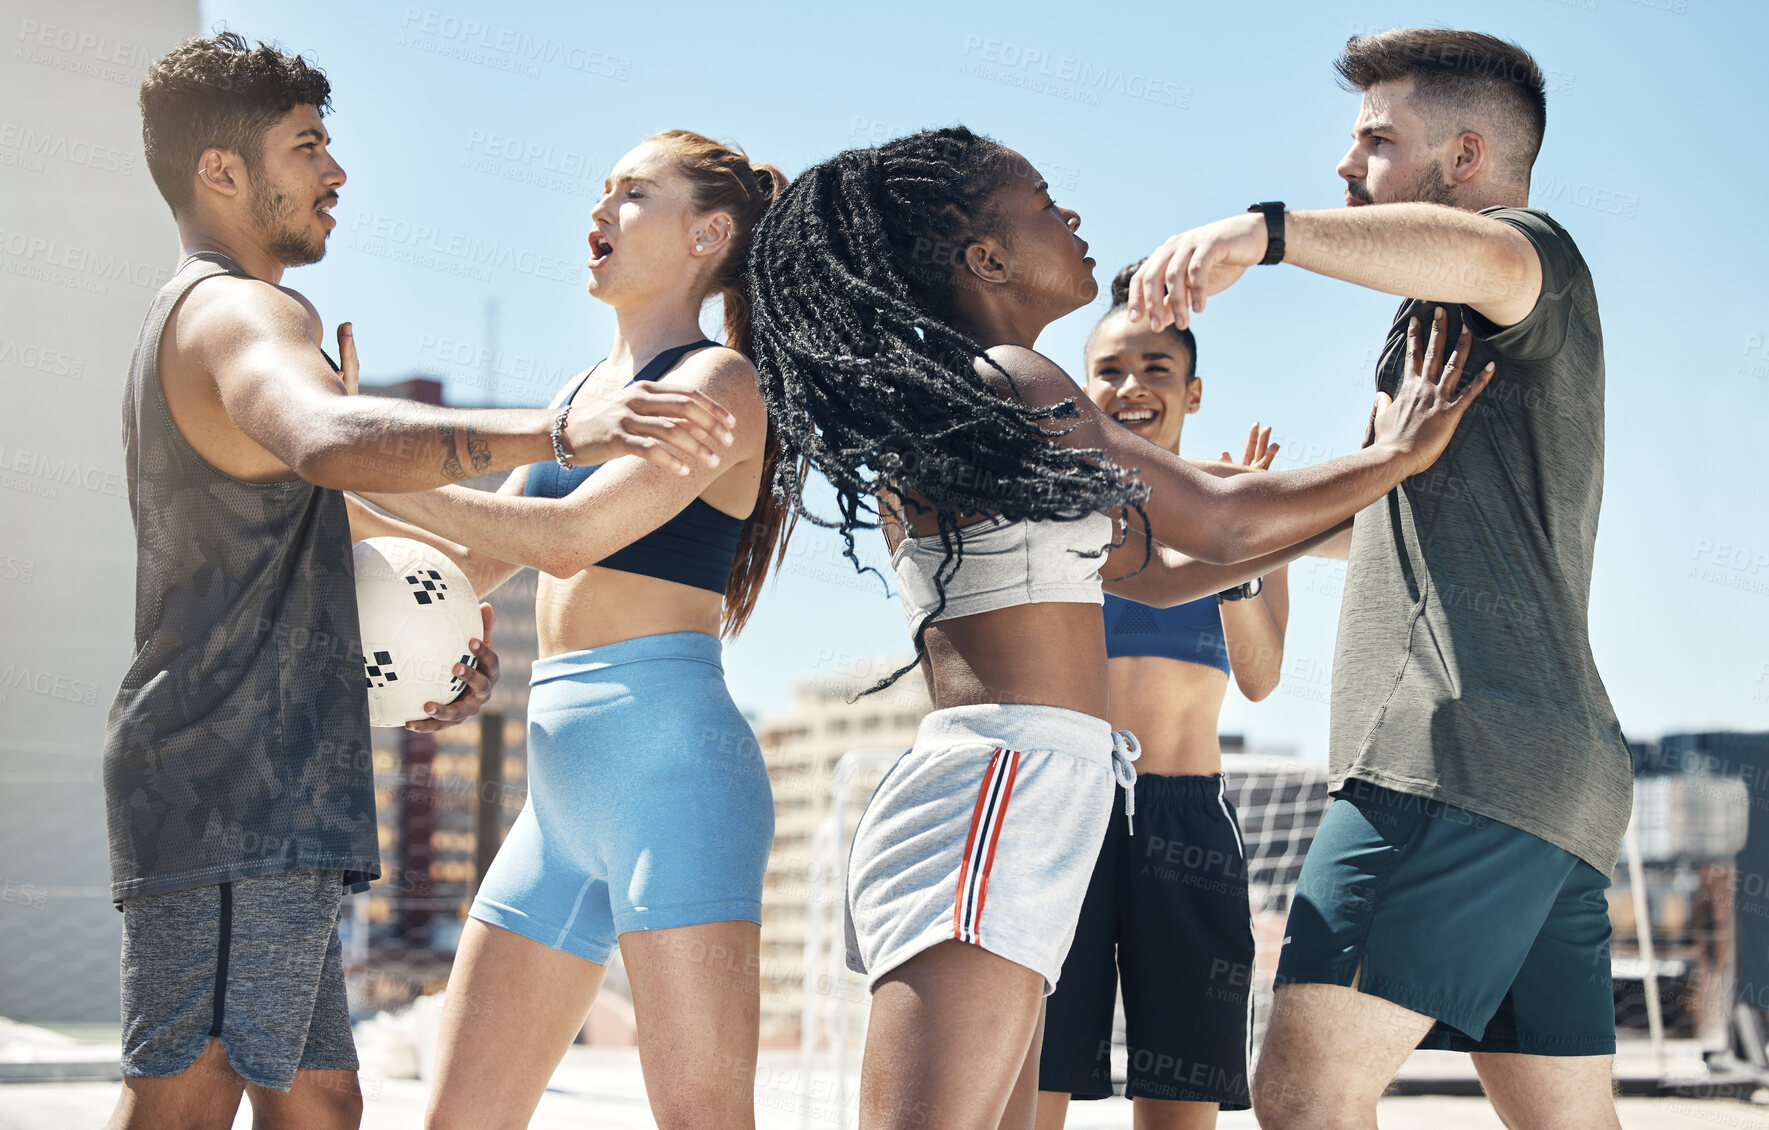 Buy stock photo Soccer, sport and fight with a woman player pushing a man athlete during a game or match outdoor on a rooftop. Football, fitness and competition with a team fighting during a sport rivalry